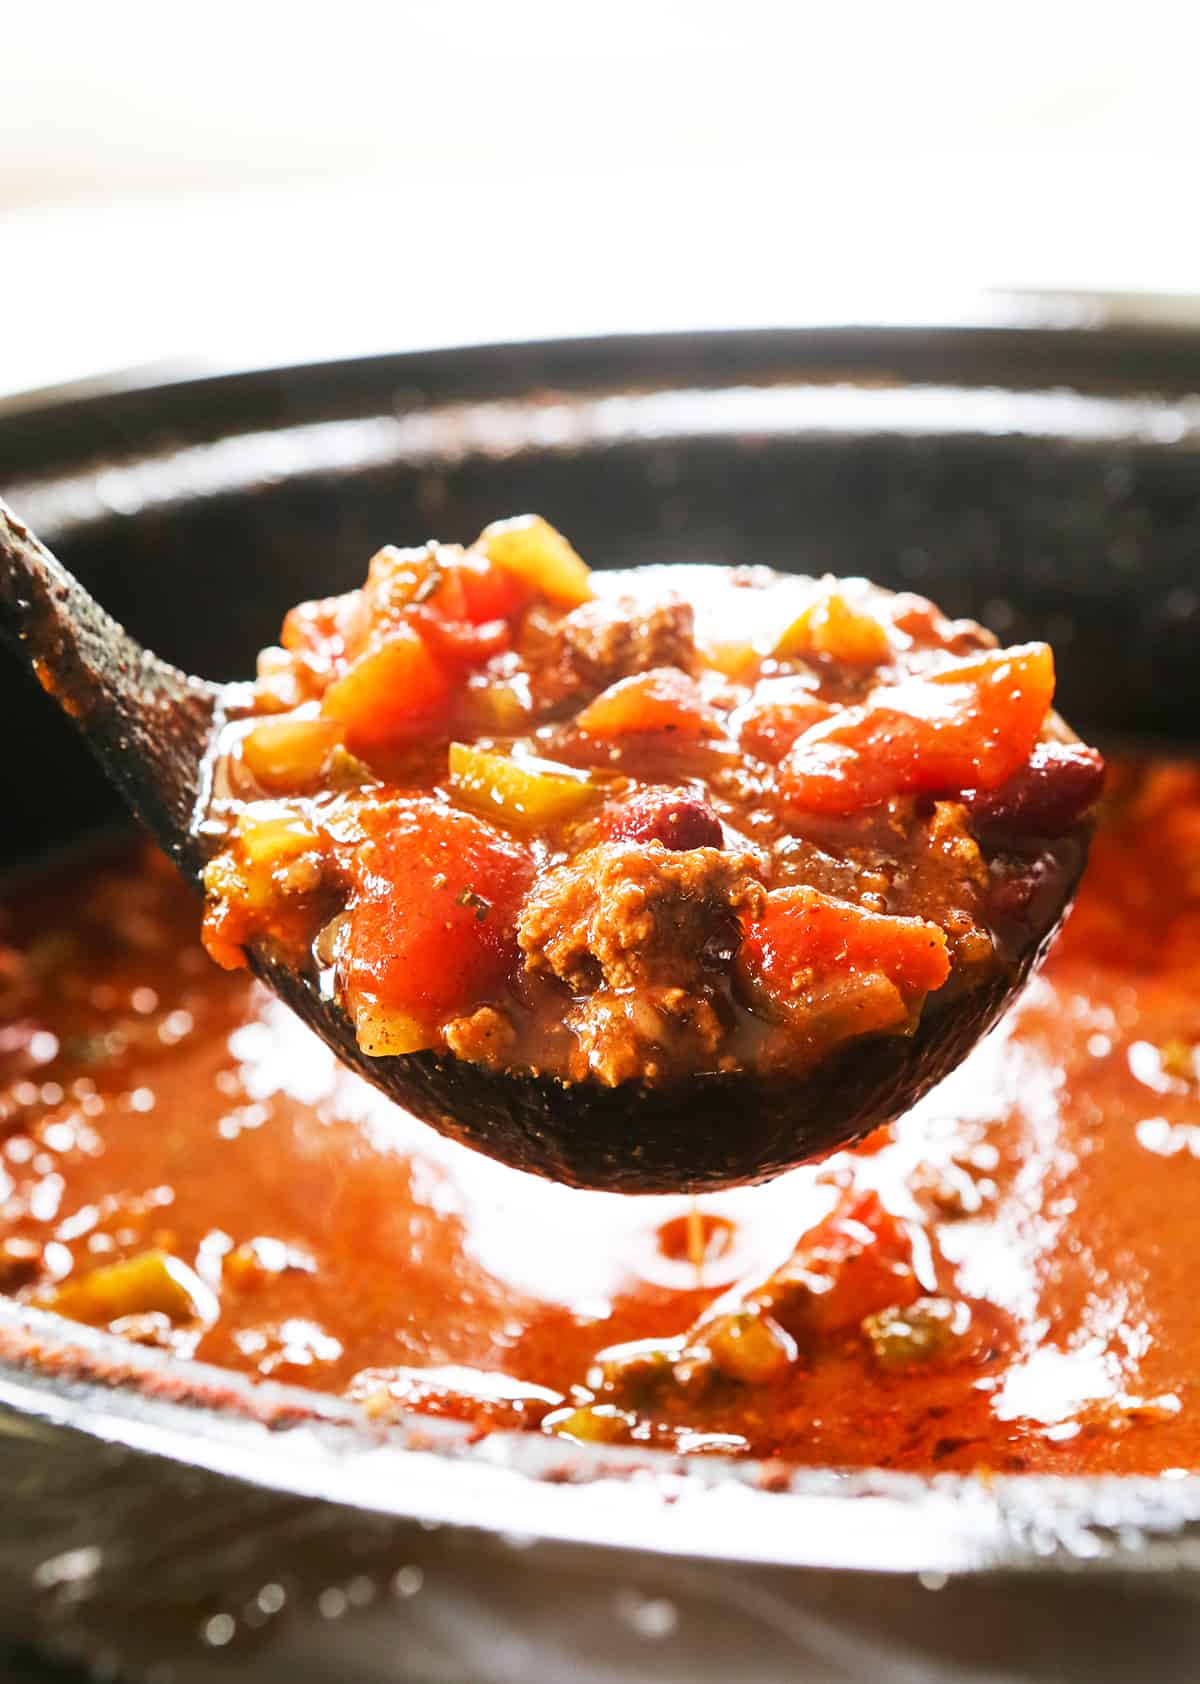 Ladle full of chili hovering over a slow cooker.